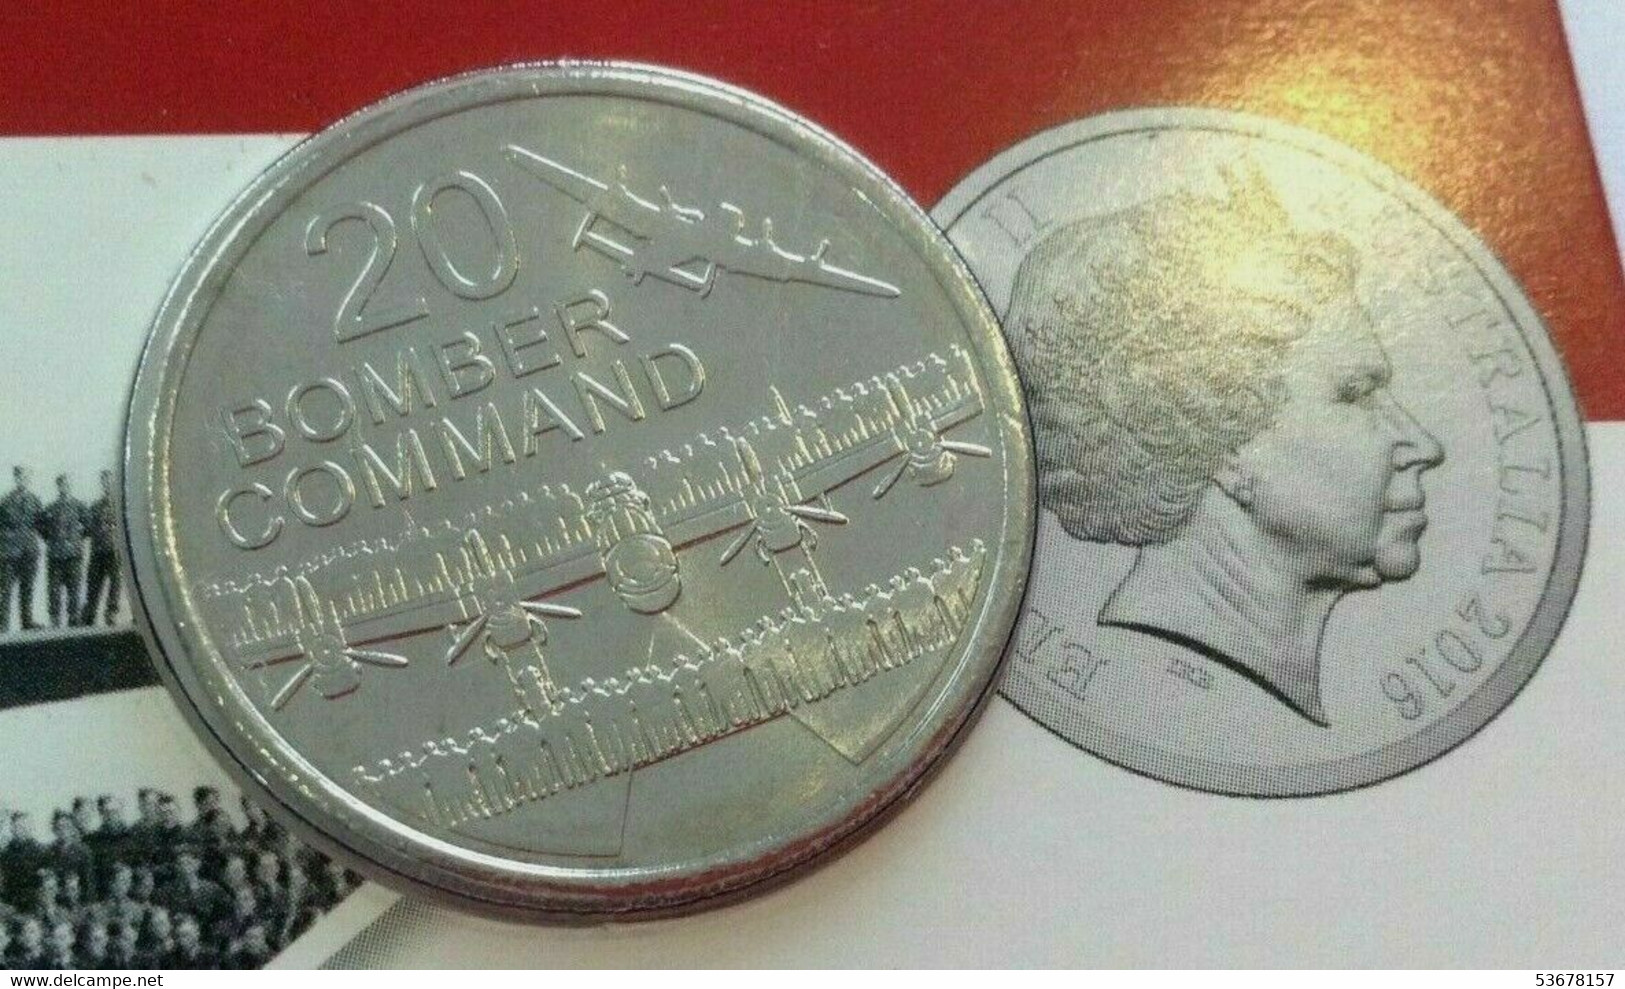 Australia 20 Cents, 2016 ANZAC To Afghanistan - Bomber Command - Collections